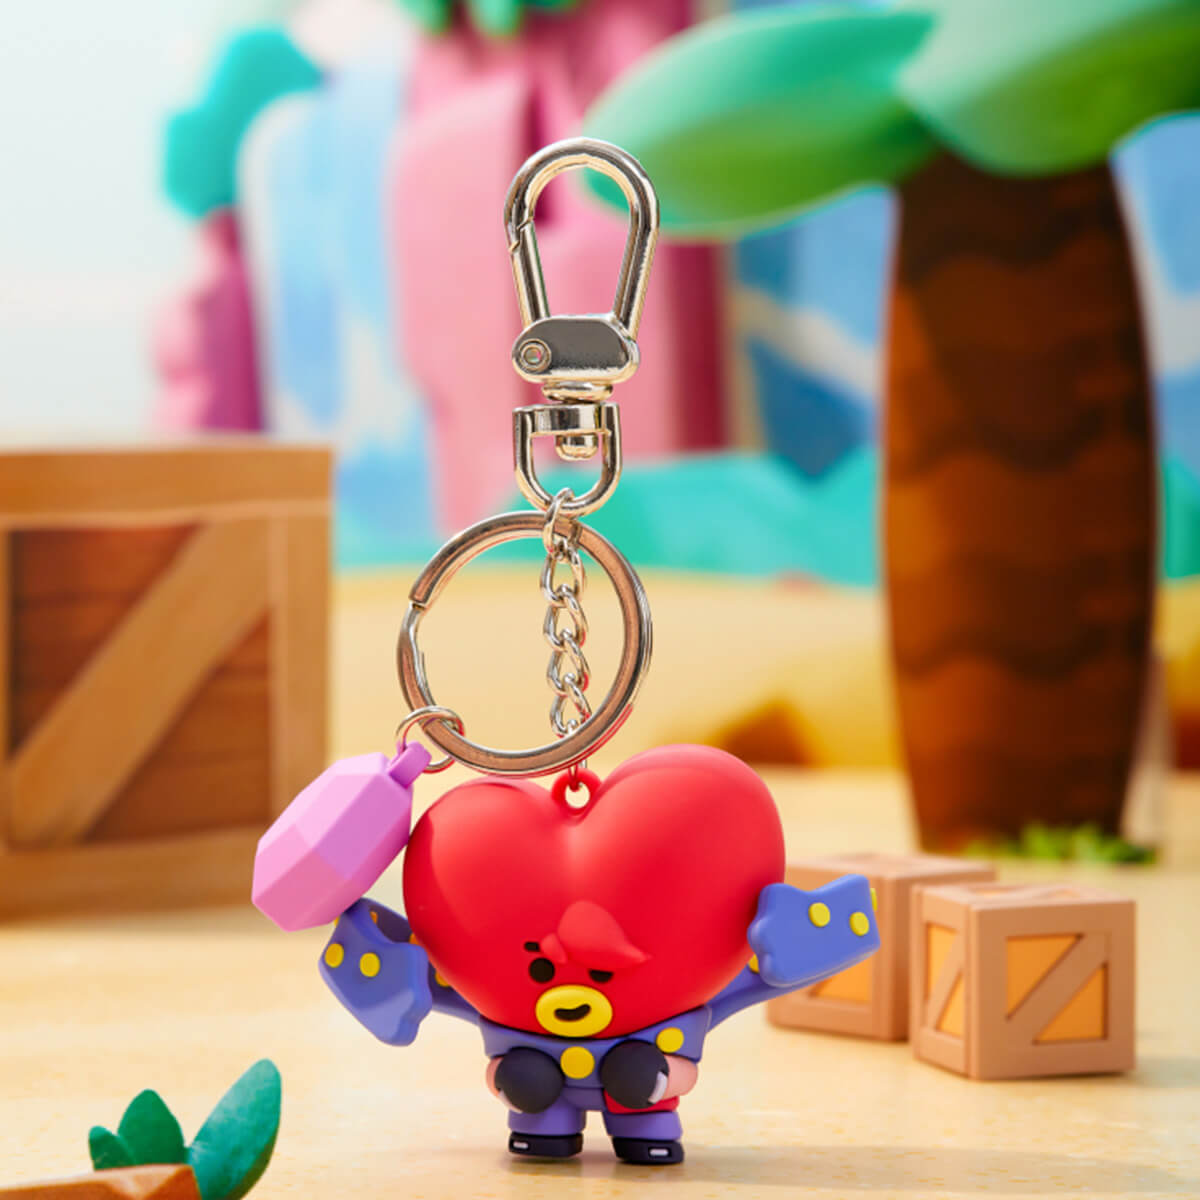 Brawl Stars X BT21 Official Authentic Goods Figure + Tracking